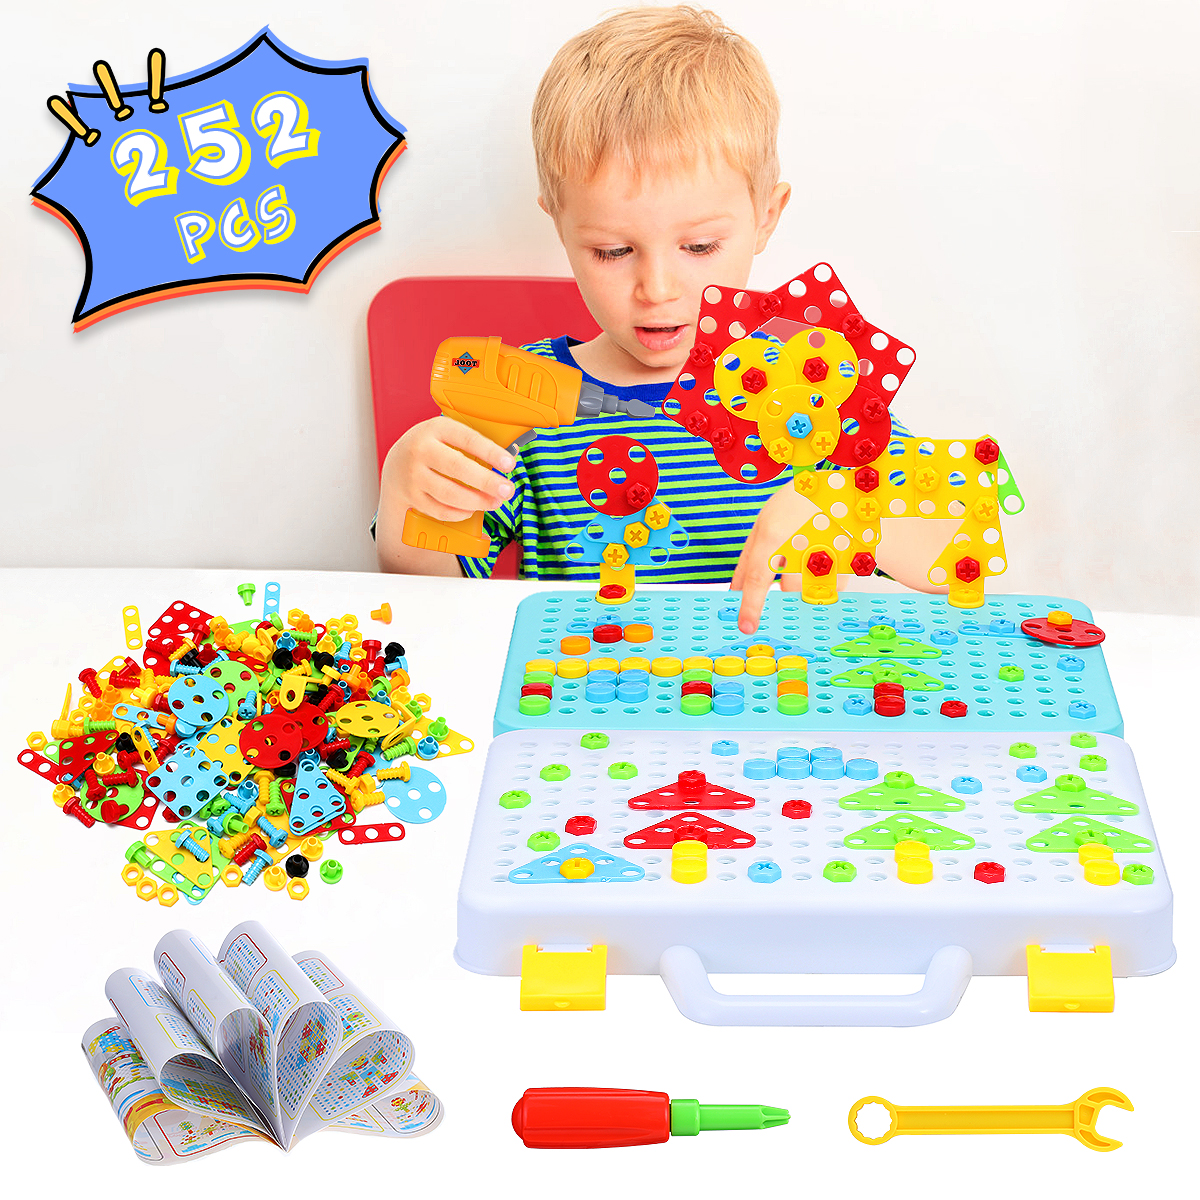 Pcikwoo Jigsaw Puzzle Unzip for Boys and Girls Indoor Toys